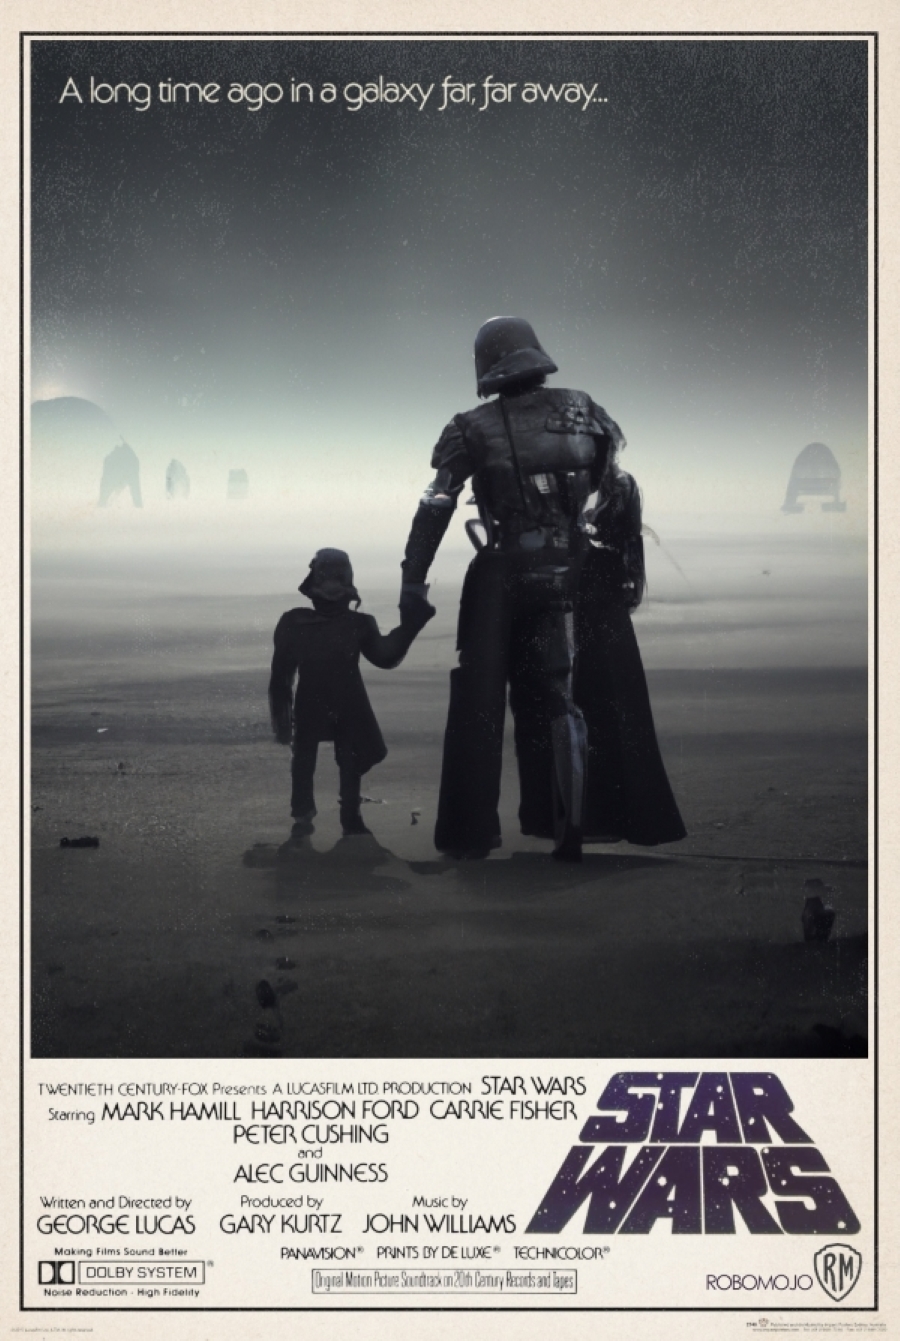 An artificial intelligence-generated movie poster of Star Wars showing Darth Vader holding hands with a miniature version of himself on a desert planet.